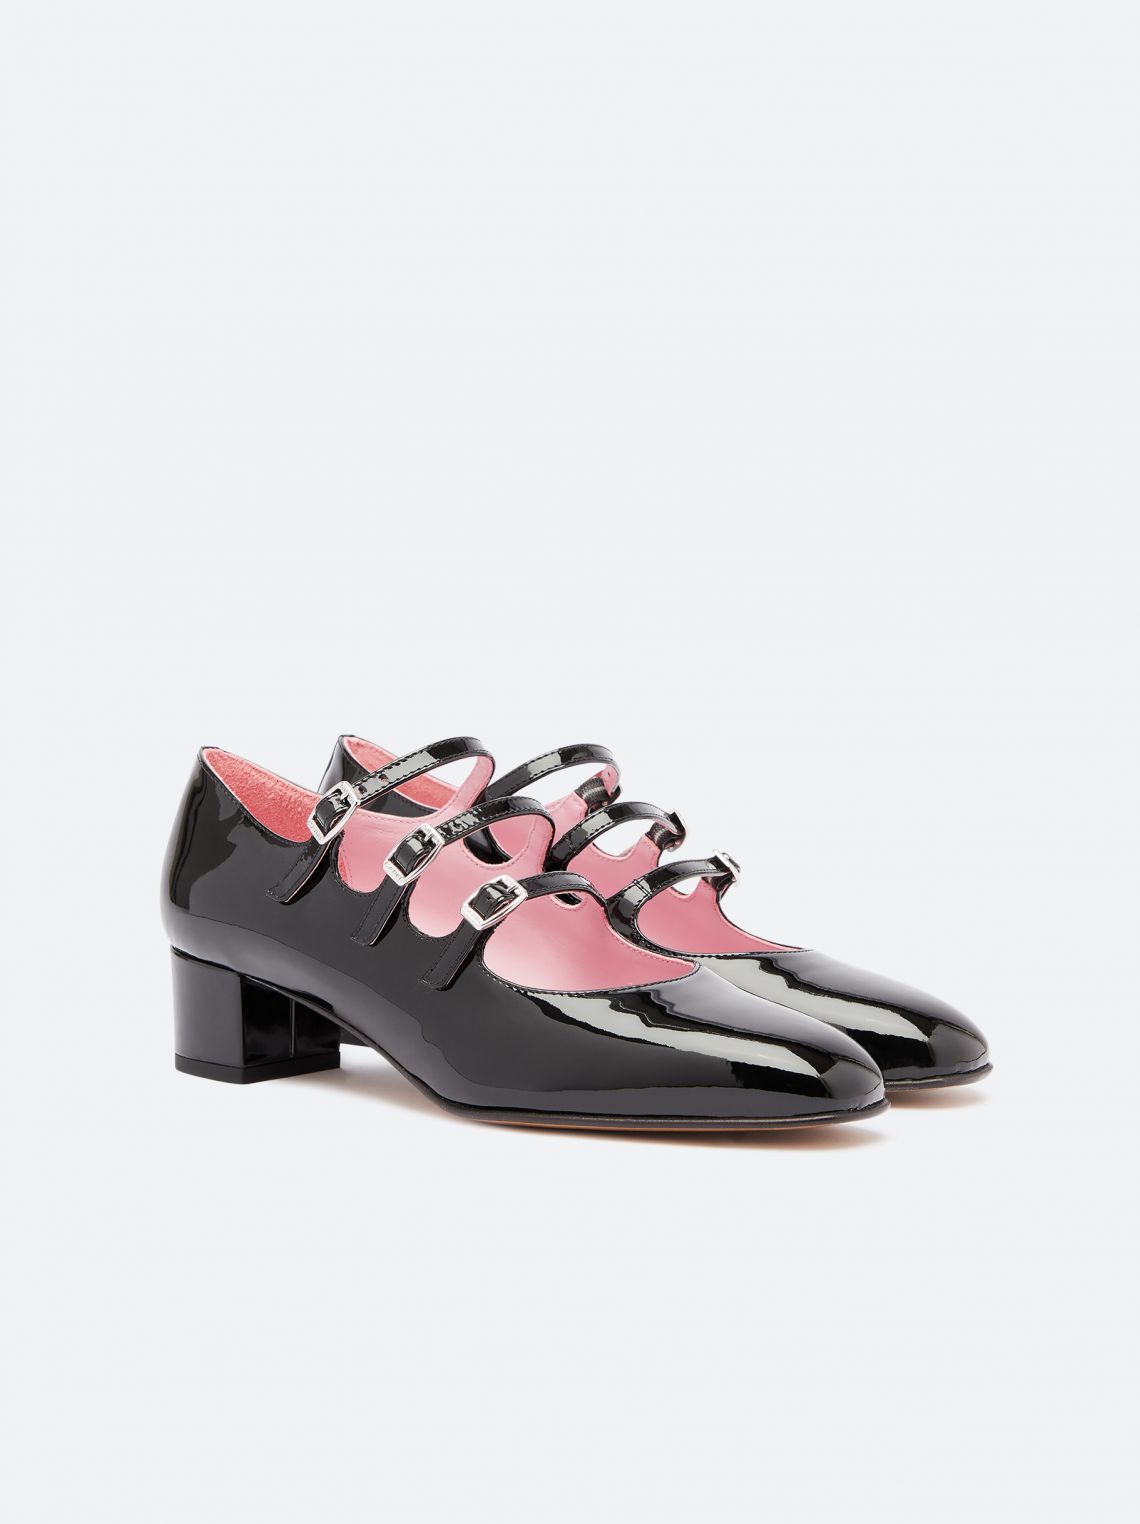 Mary Janes with straps| Carel Paris